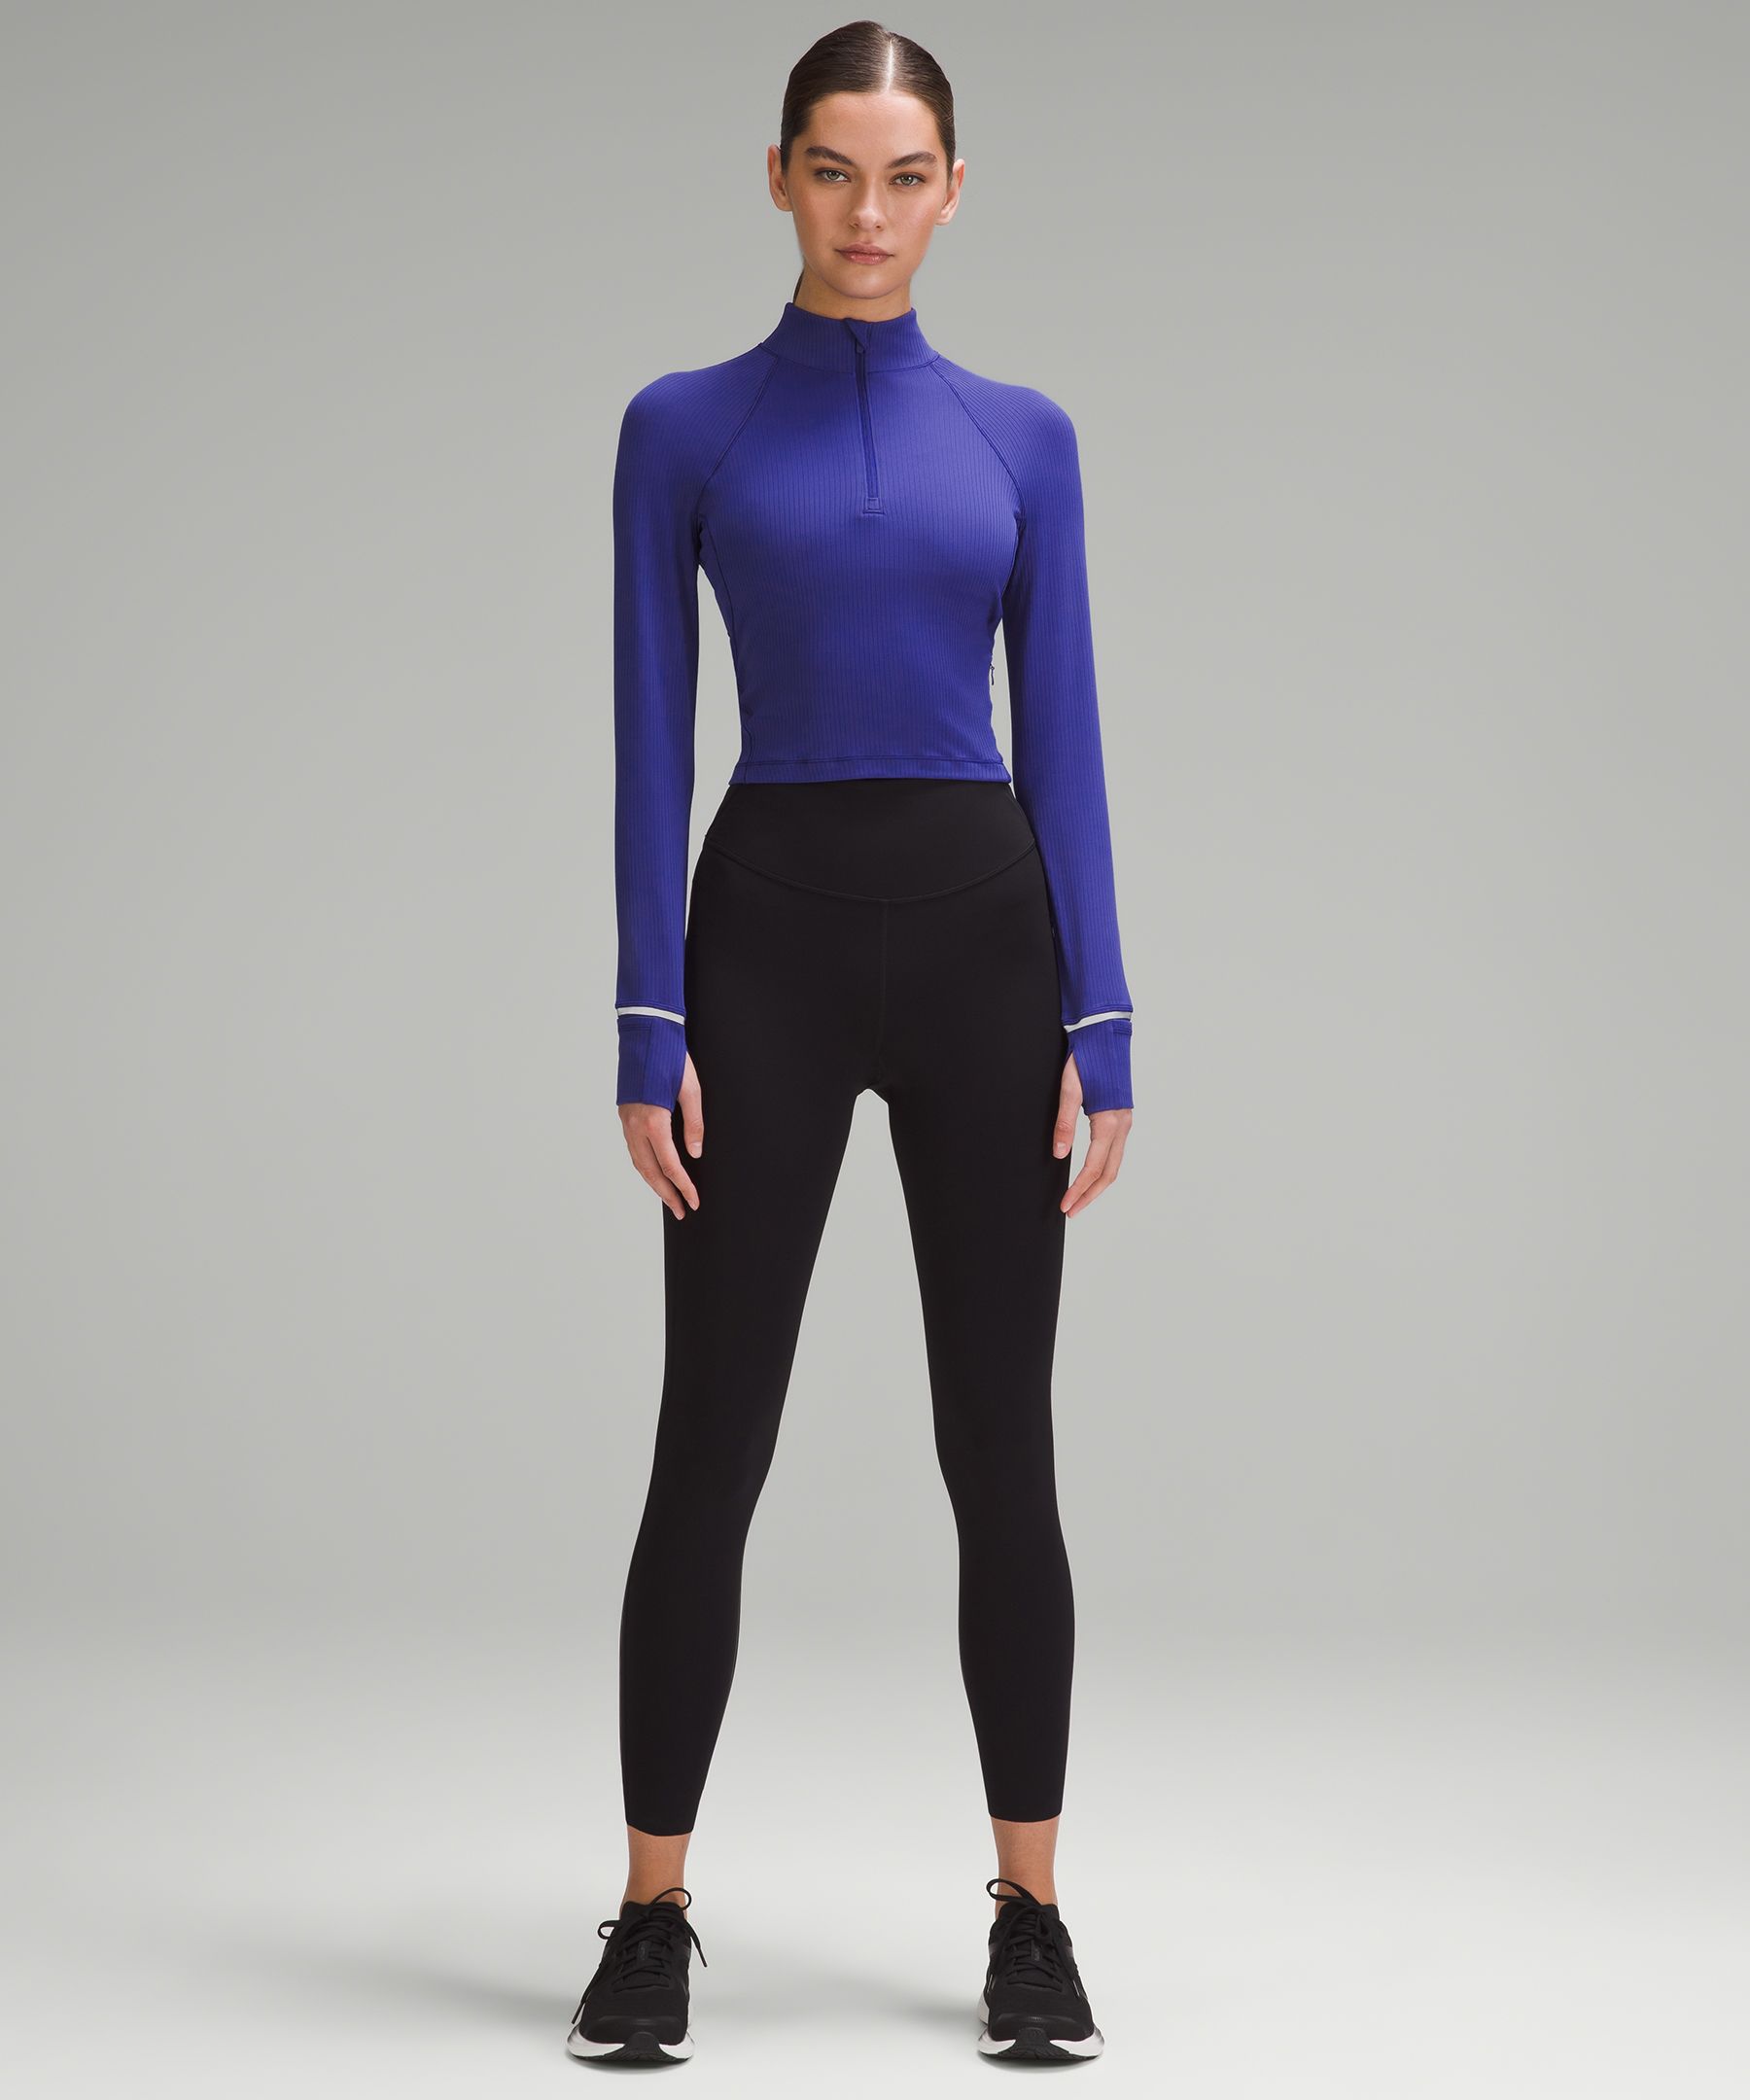 Women's Thermal Clothes